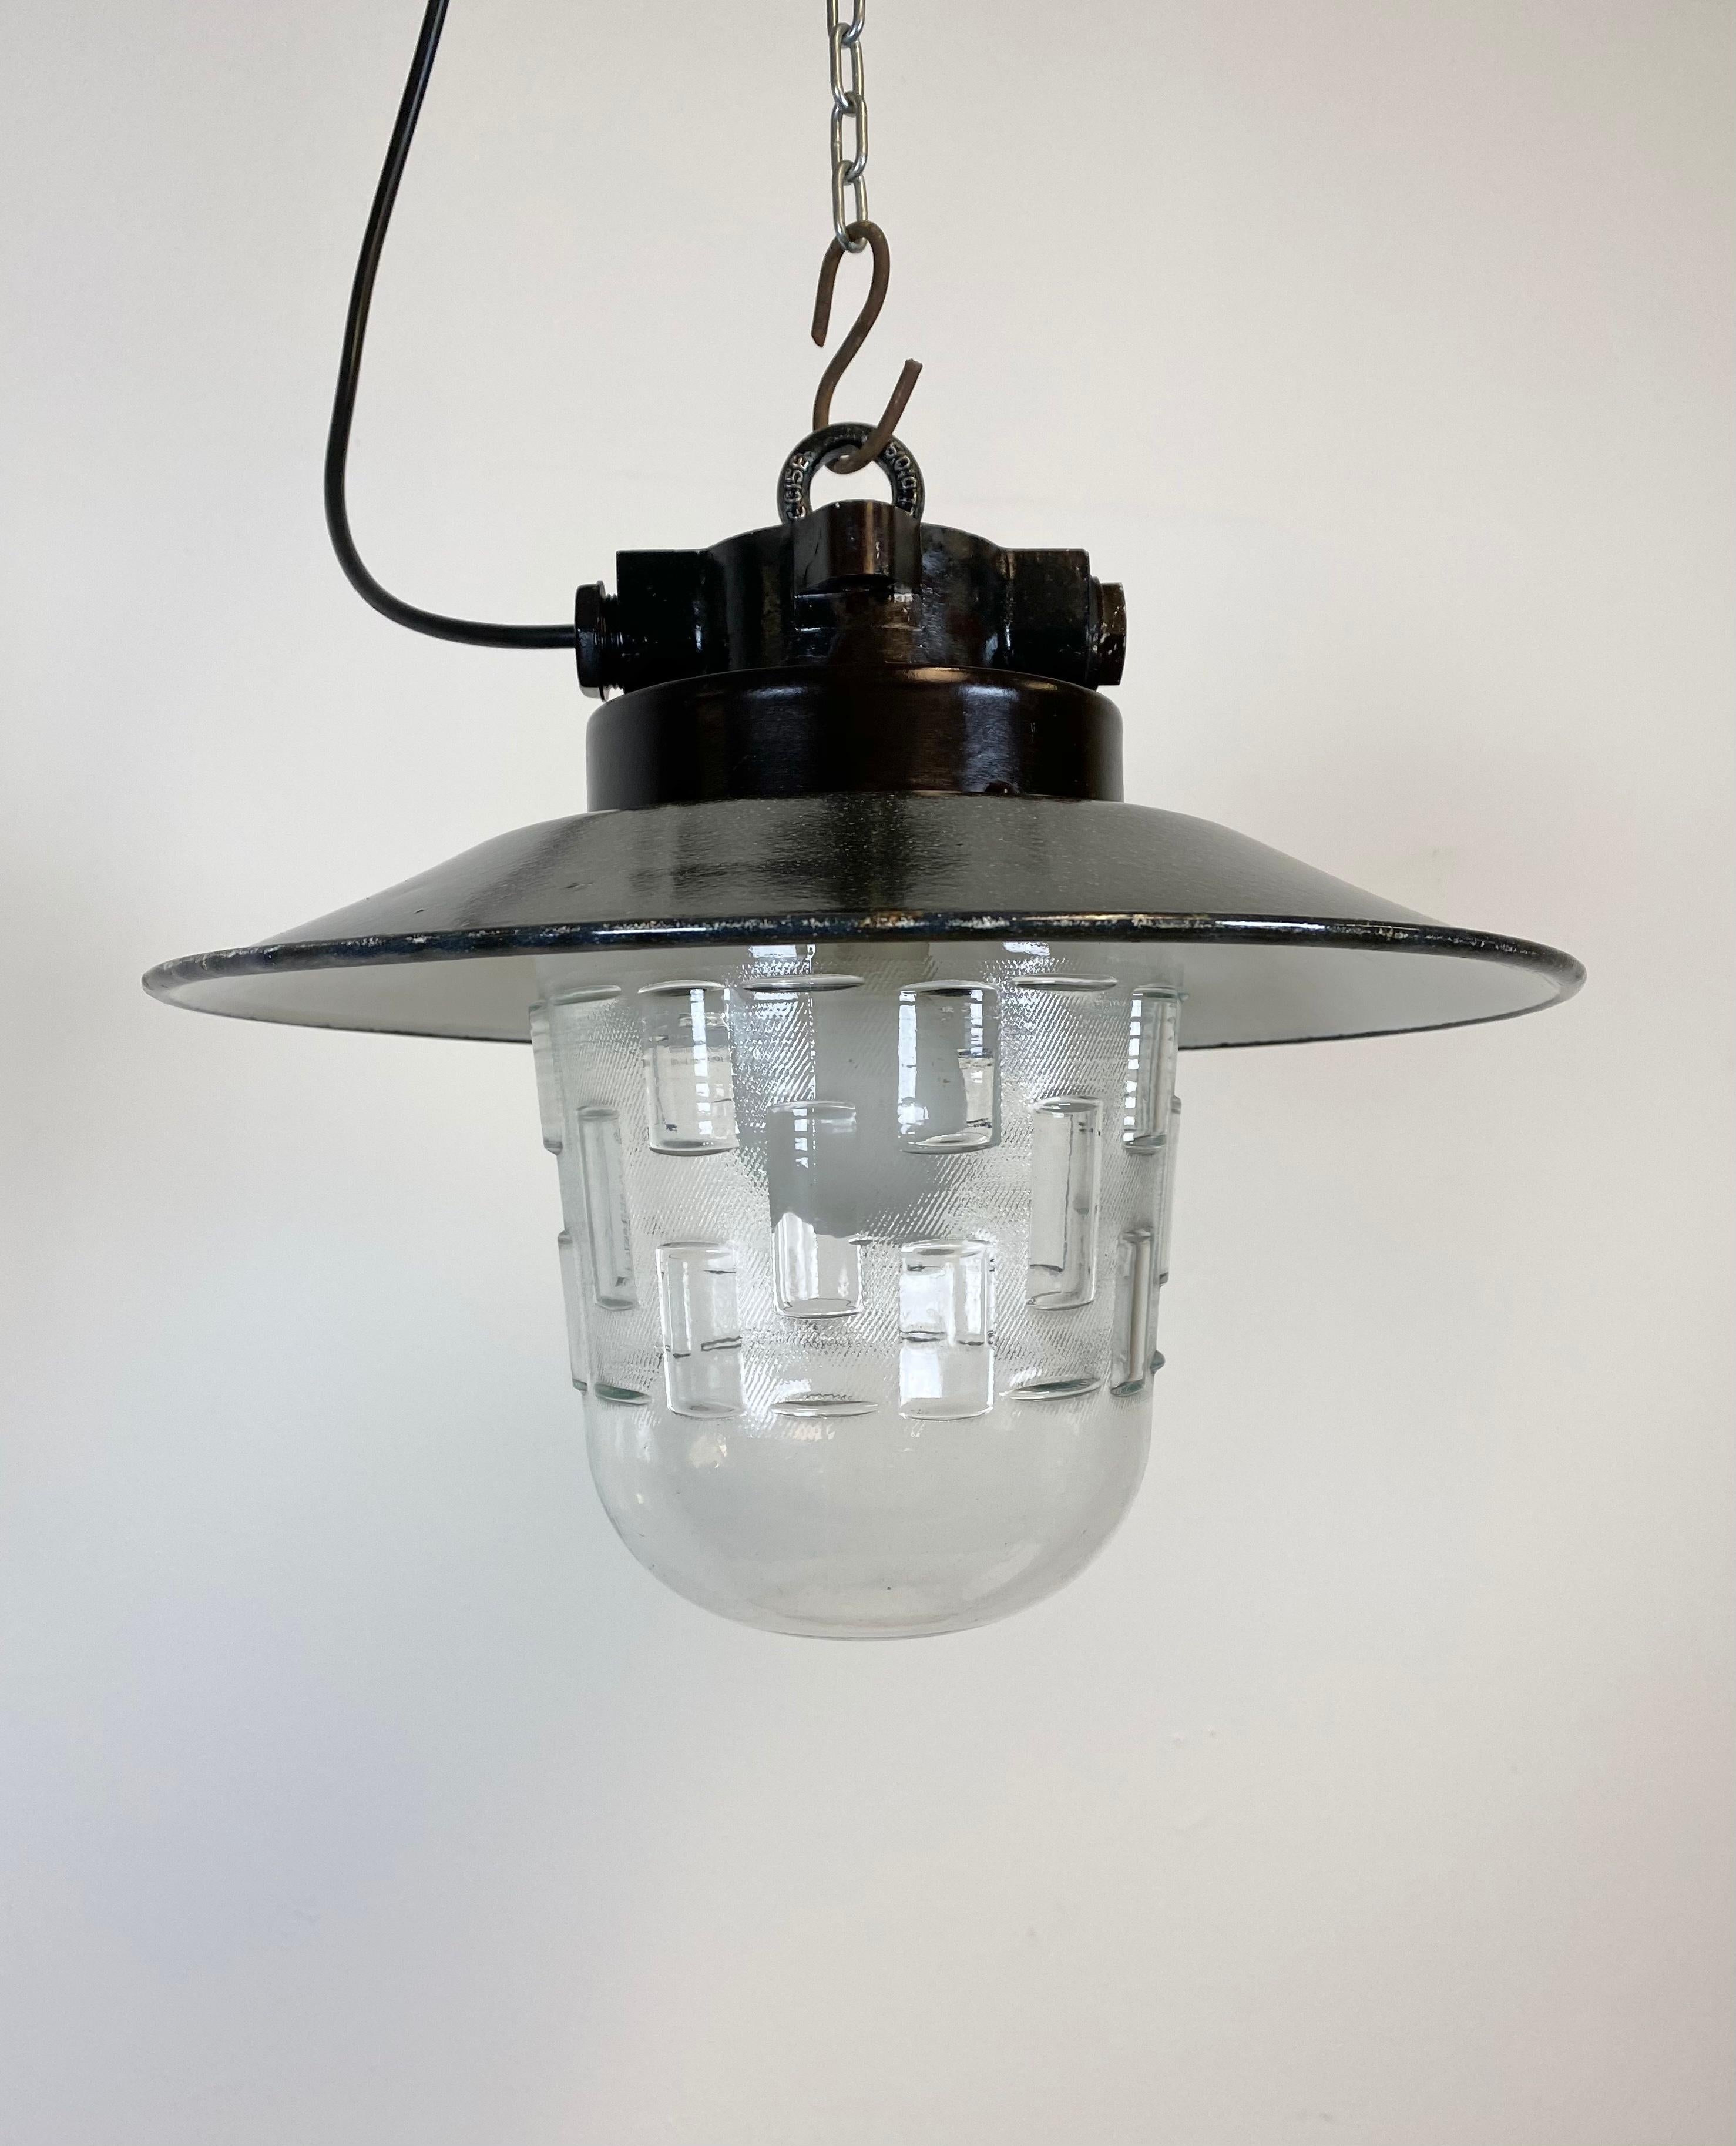 Vintage Industrial lamp from 1970s. Bakelite top. Grey enamel iron shade with white interior. Clear glass. Porcelain socket requires E 27 lightbulbs. Newly wired. The weight of the lamp is 2 kg. The diameter of the shade is 34 cm.